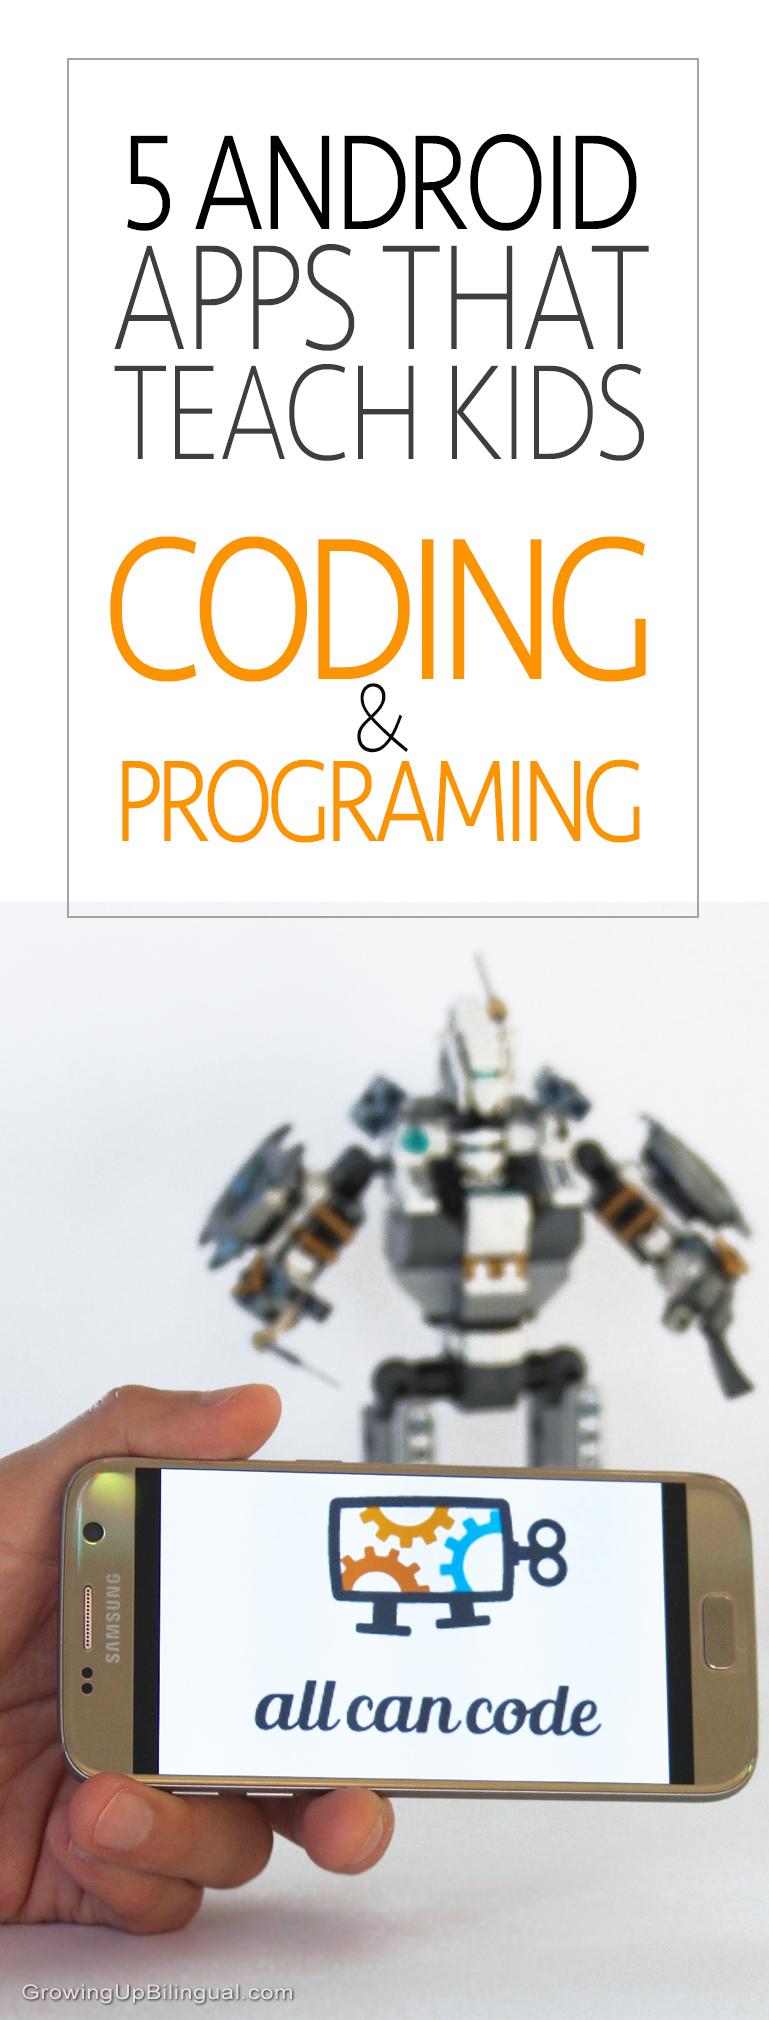 5 Android Apps That Teach Kids Coding and Programing